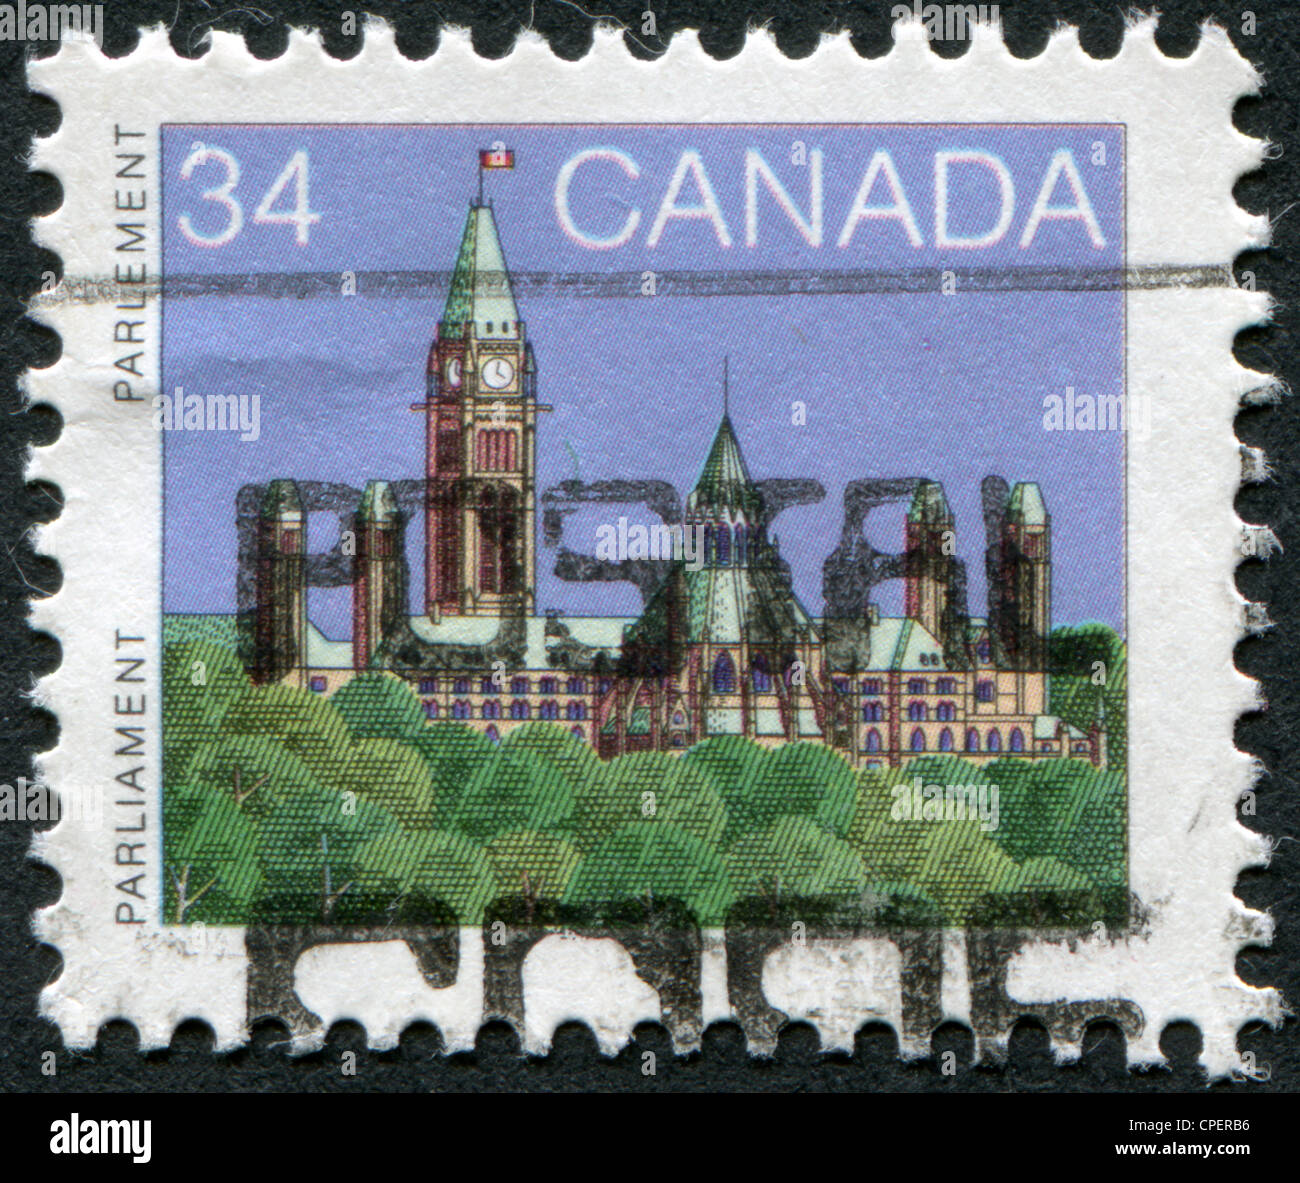 CANADA - CIRCA 1982: Postage stamps printed in Canada, shows a Parliament (Library), circa 1982 Stock Photo